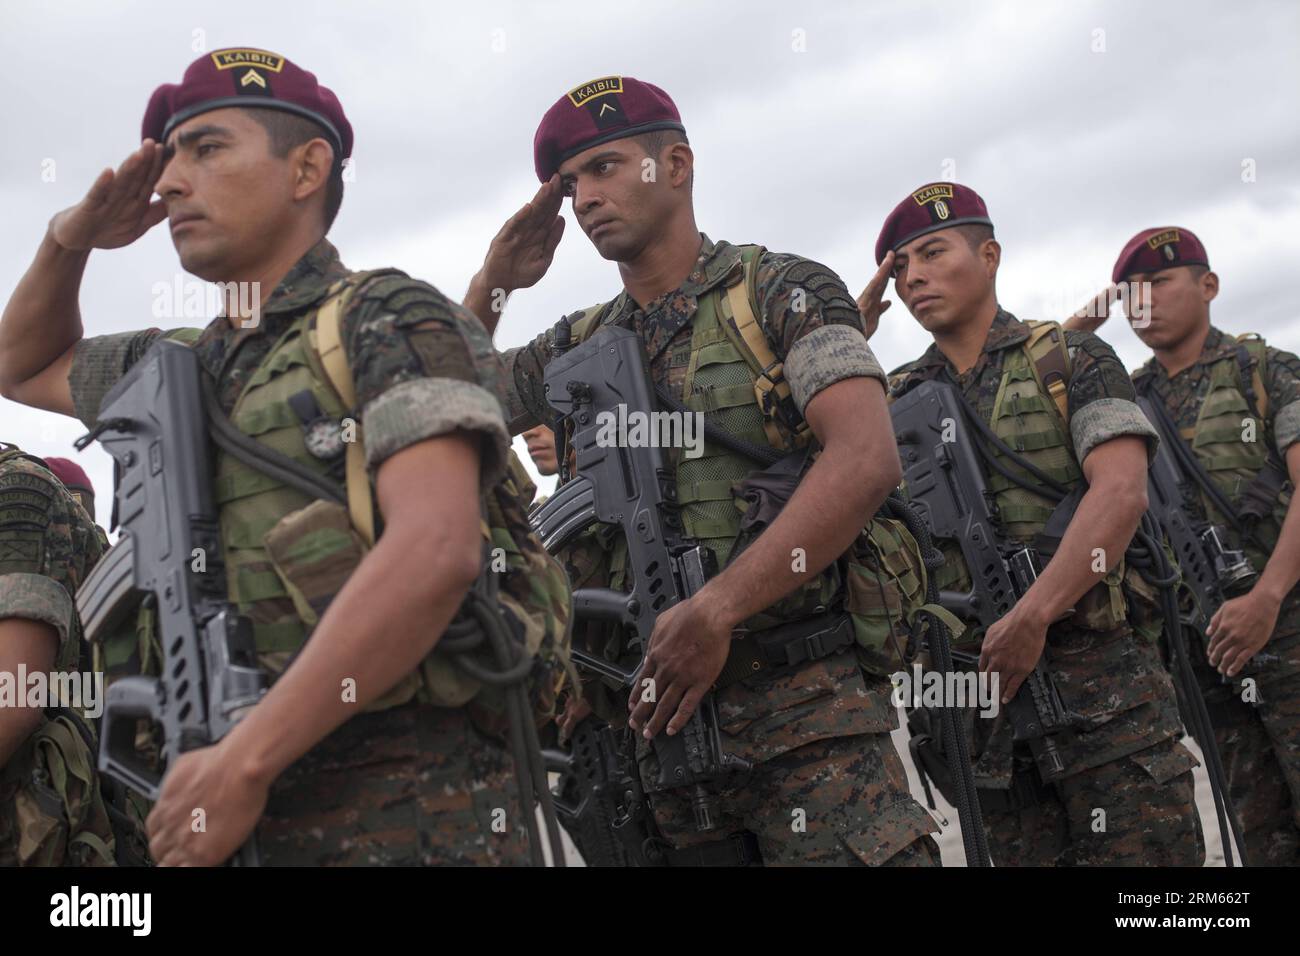 Bildnummer: 60815796  Datum: 10.12.2013  Copyright: imago/Xinhua     GUATEMALA CITY,  -- Soldiers of the Special Force Kaibil of Guatemalan Army participate in a parade to commemorate the 92nd anniversary of the Guatemalan Air Force, in Guatemala City, capital of Guatemala, on Dec. 10, 2013. (Xinhua/Luis Echeverria) (rt) (ah) GUATEMALA-GUATEMALA CITY-MILITARY-CELEBRATION PUBLICATIONxNOTxINxCHN Militär Soldat xas x0x 2013 quer premiumd Stock Photo